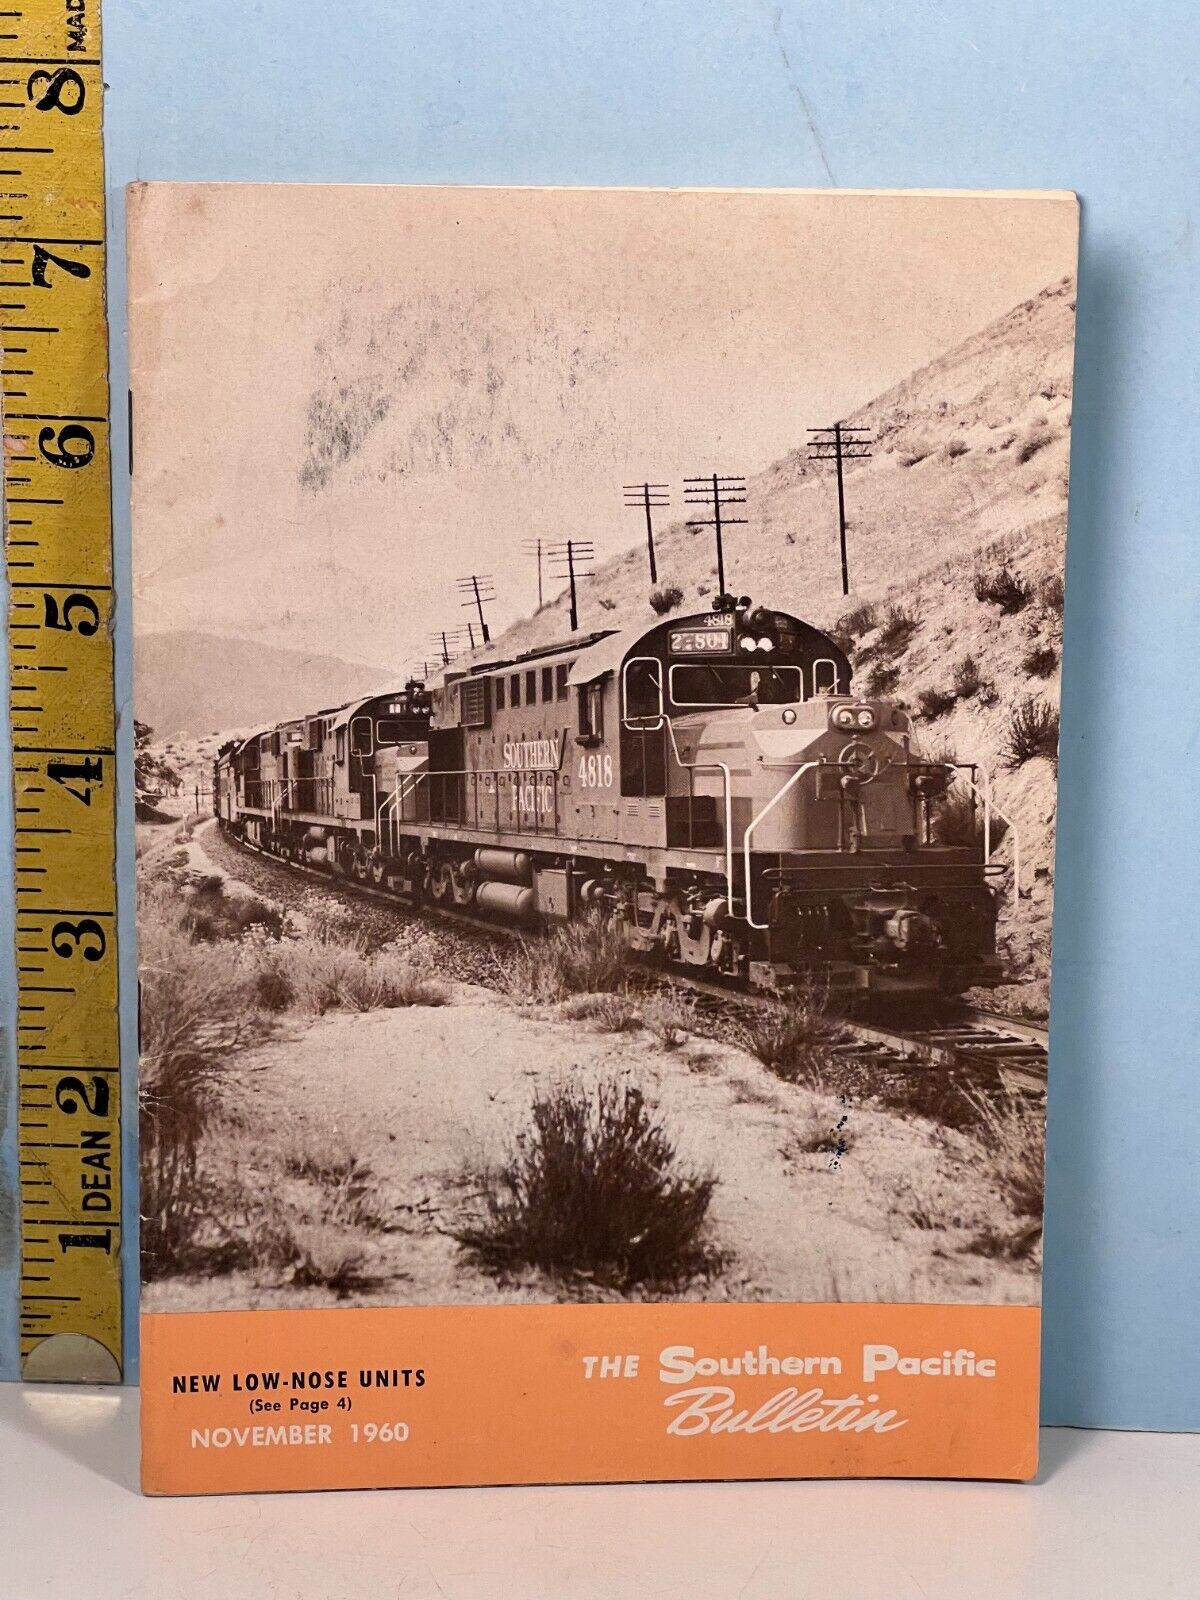 Nov. 1960 The Southern Pacific Railroad Bulletin News Low Noise Units